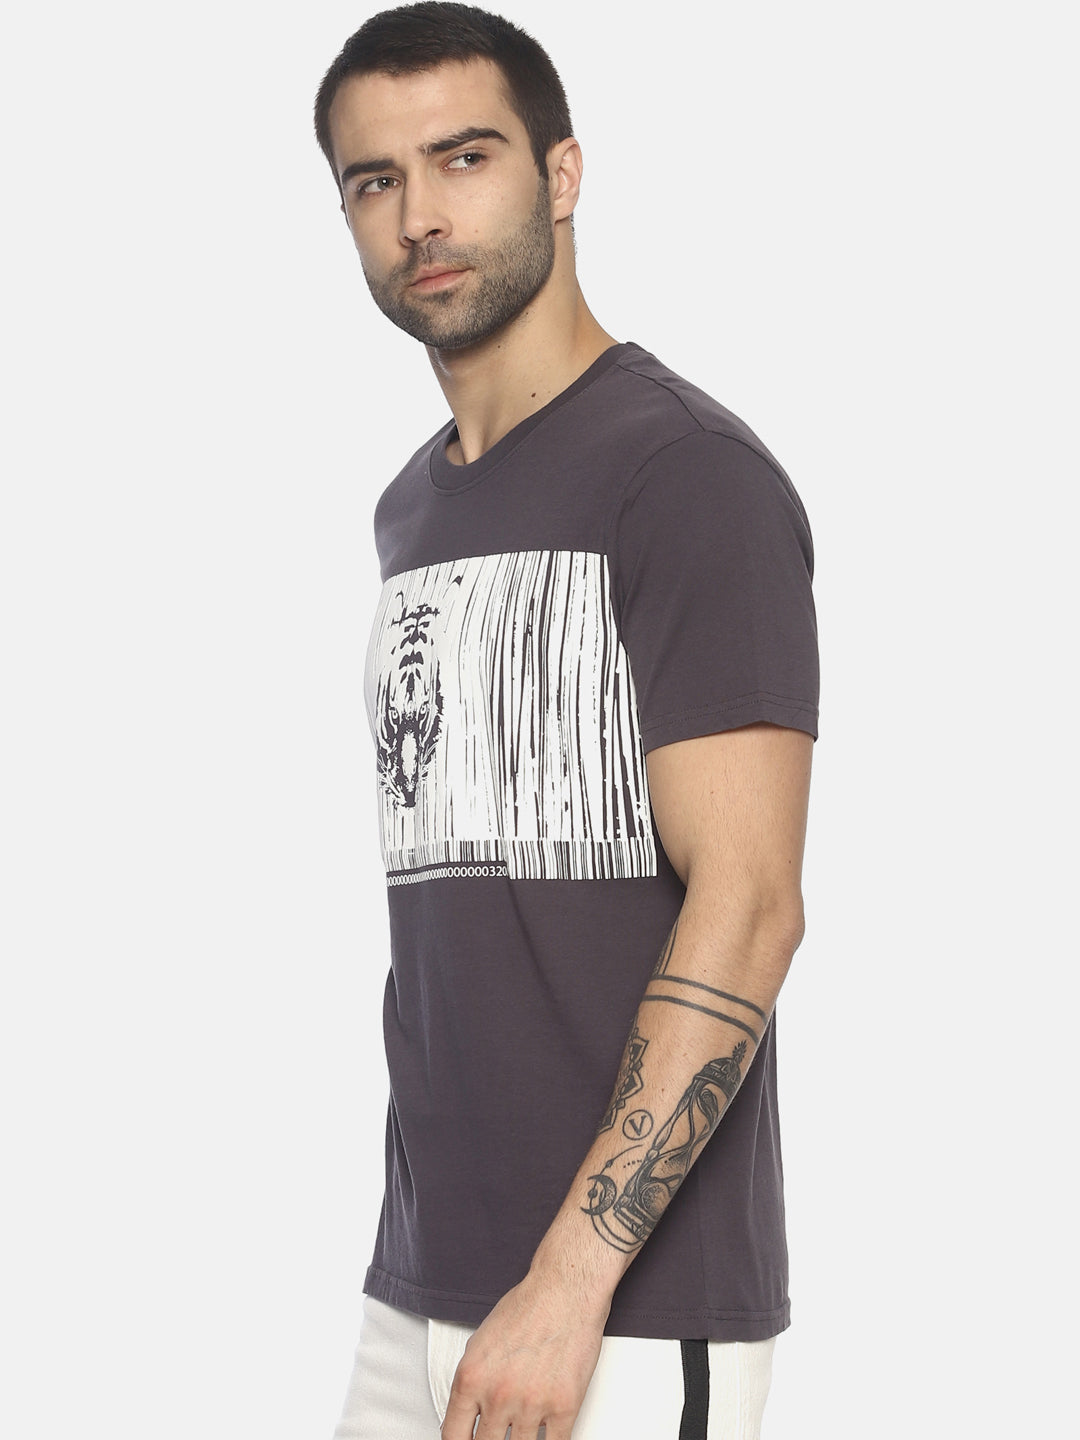 Wolfpack Round Neck Barcode Tiger Printed Grey T-Shirt Wolfpack